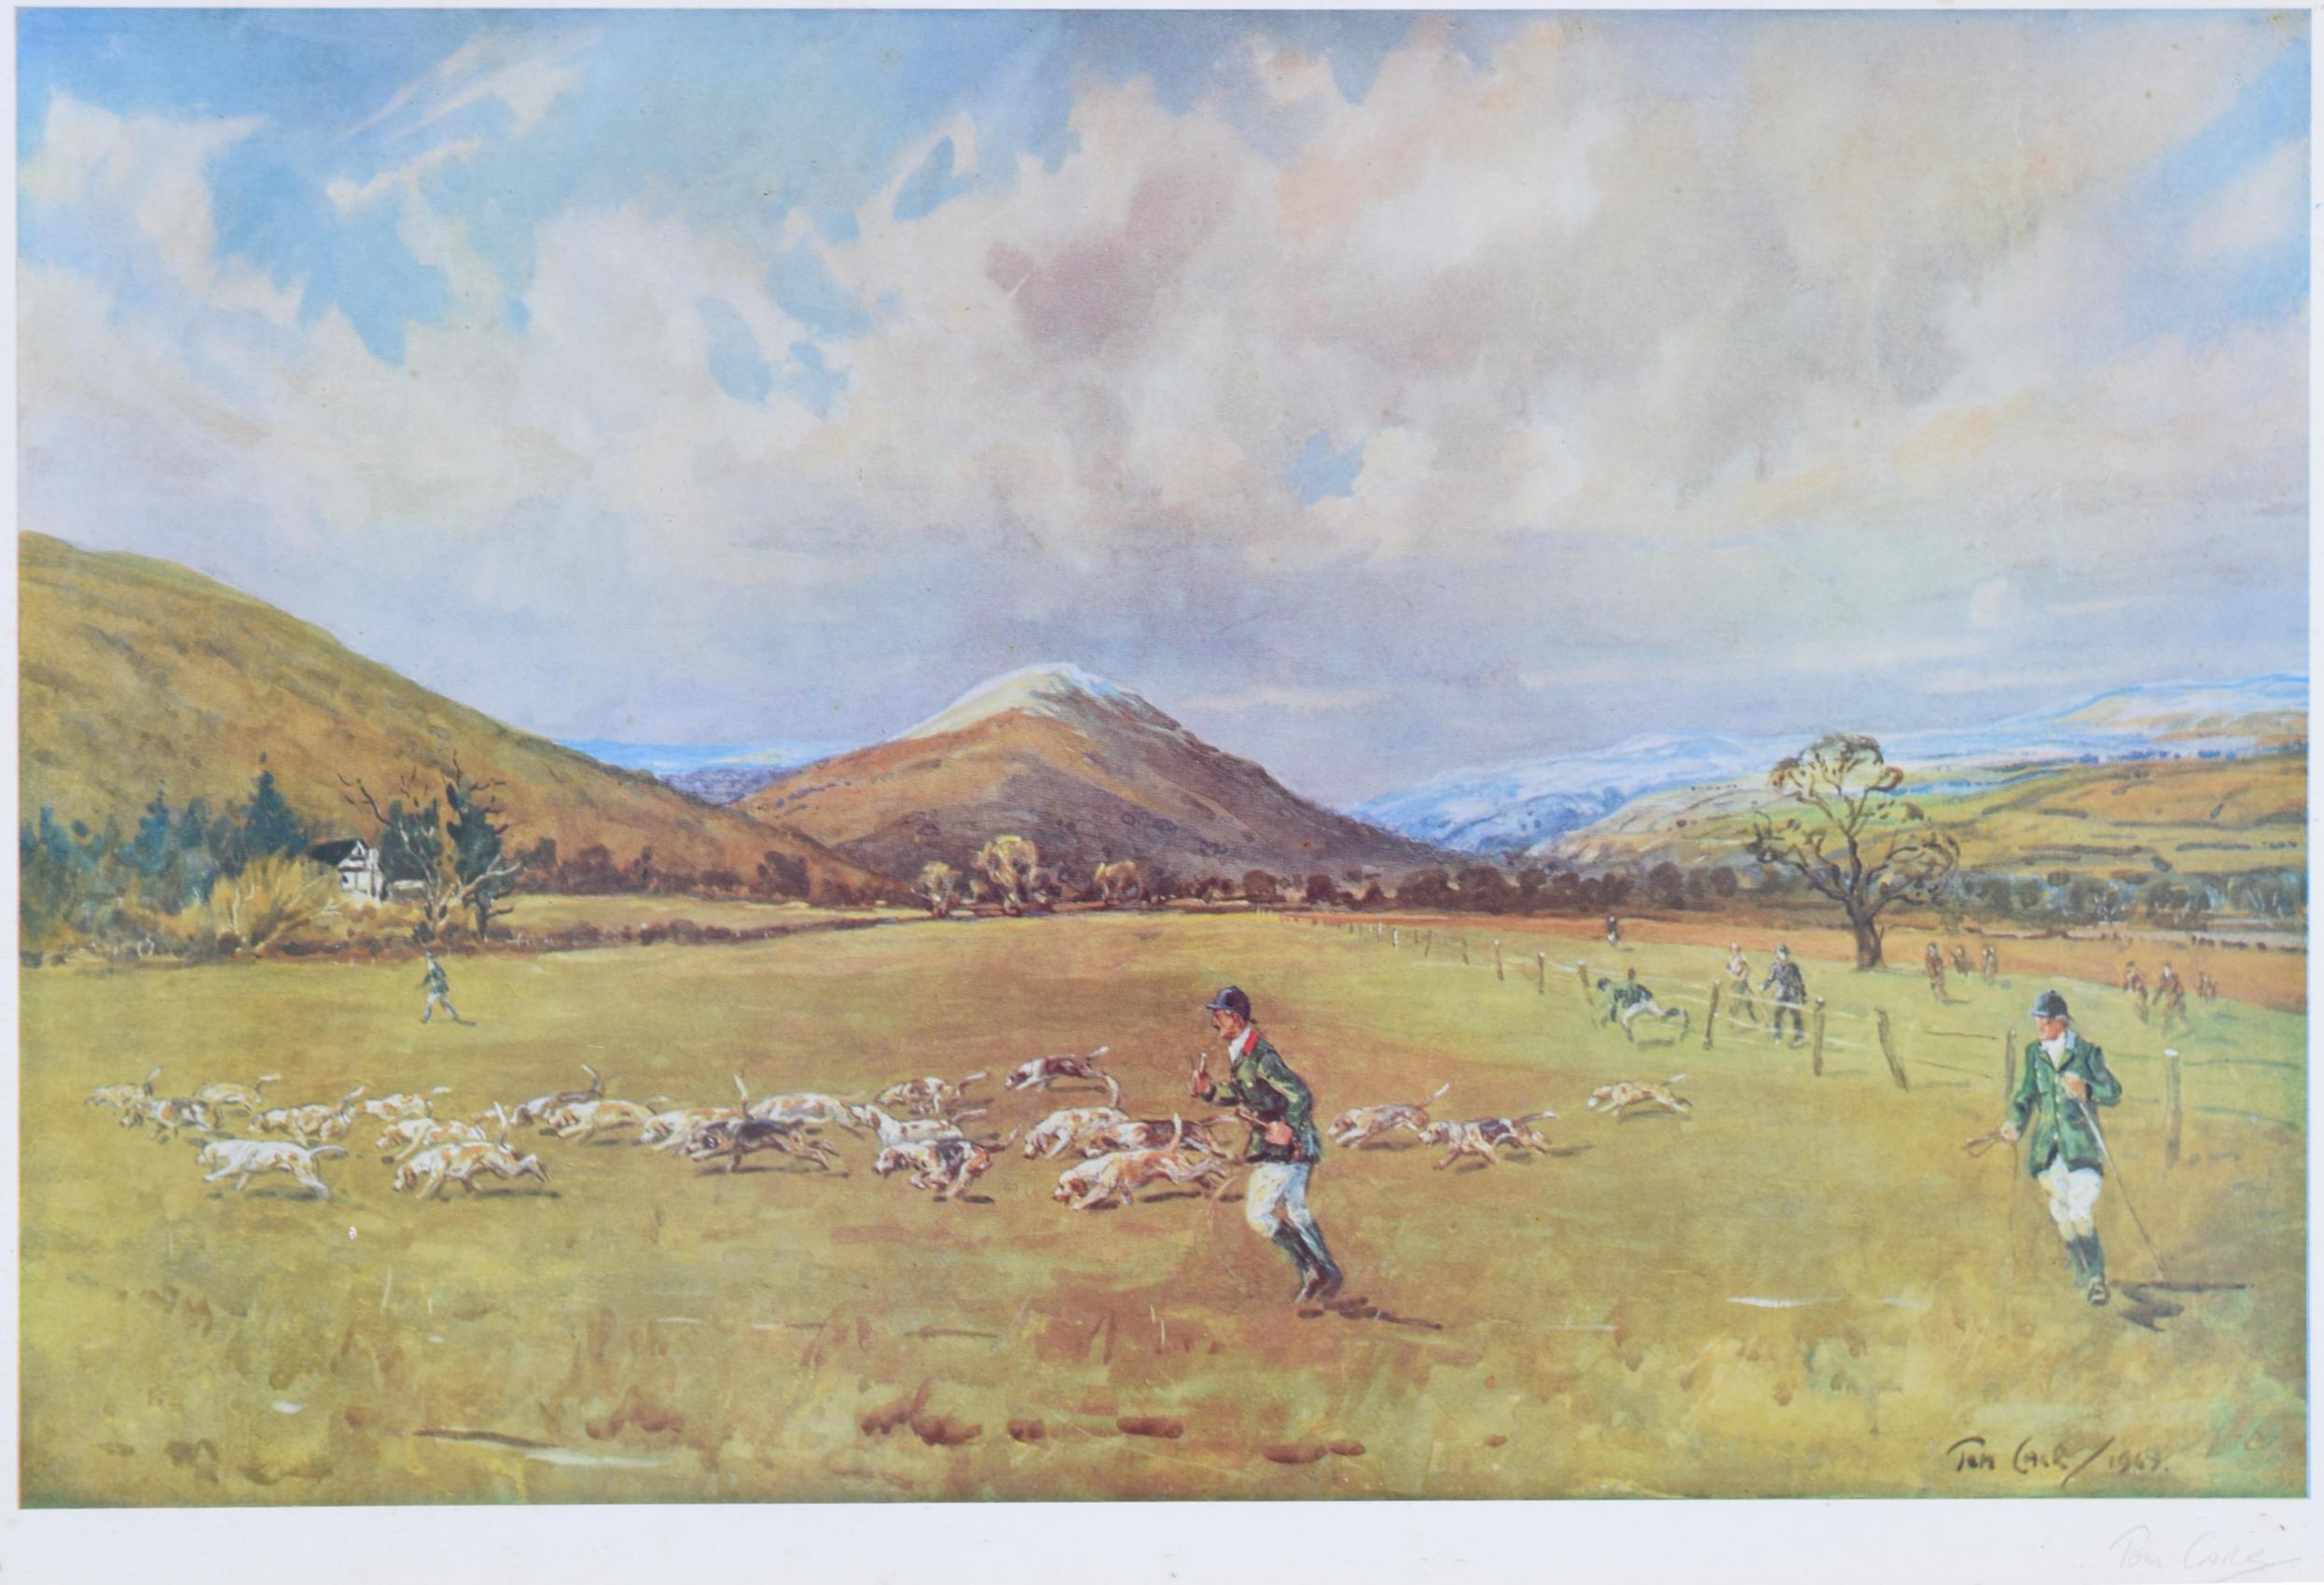 Shropshire Beagles hunting lithograph by Tom Carr